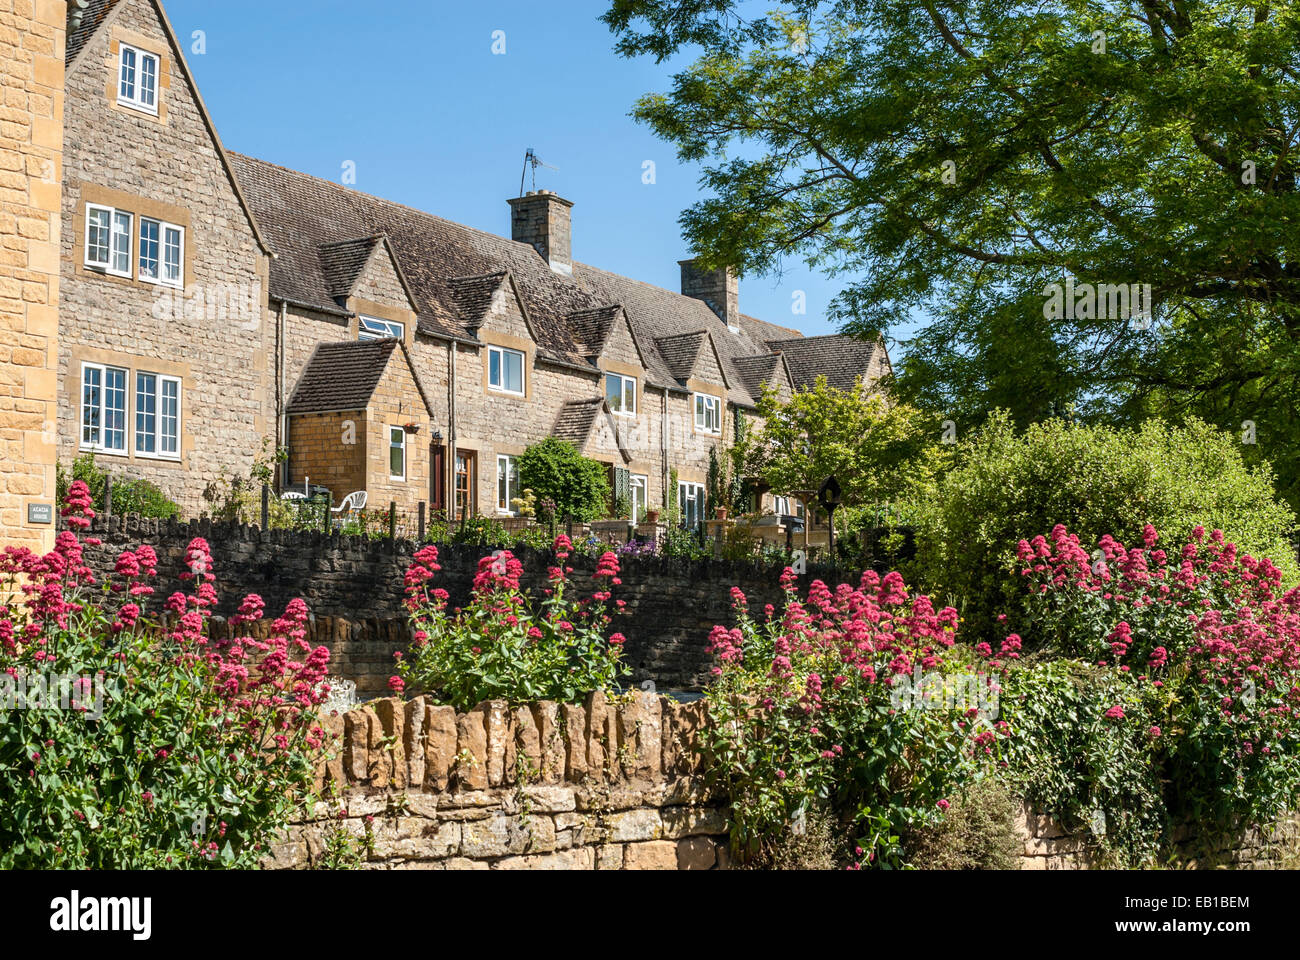 Cotsworld Cottages in Chipping Campden, Gloucestershire, England Stock Photo